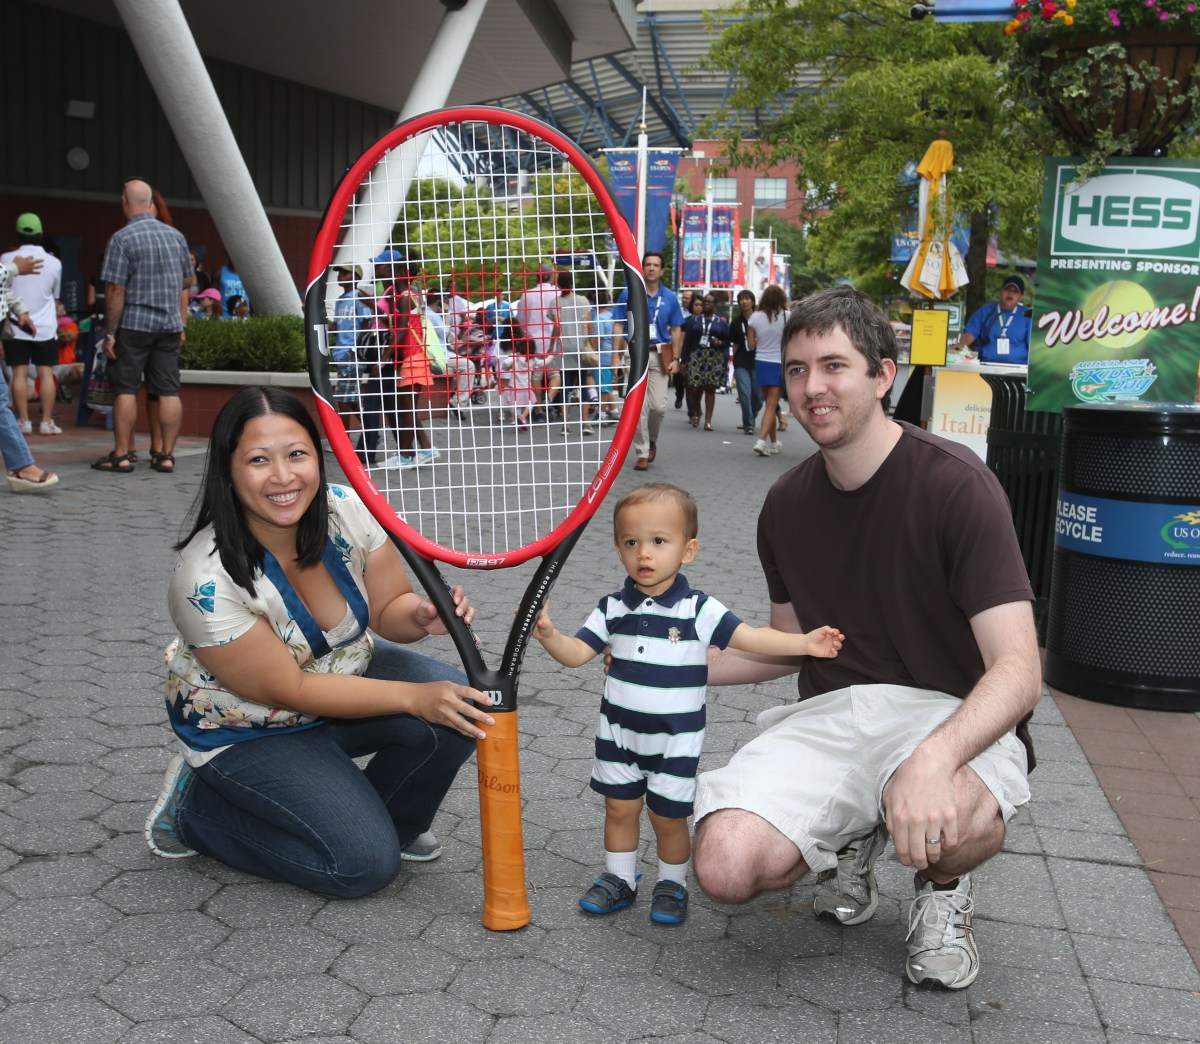 16-month-old Noah Val of Whitestone at his first US Open event with his parents, Jennifer and Peter.